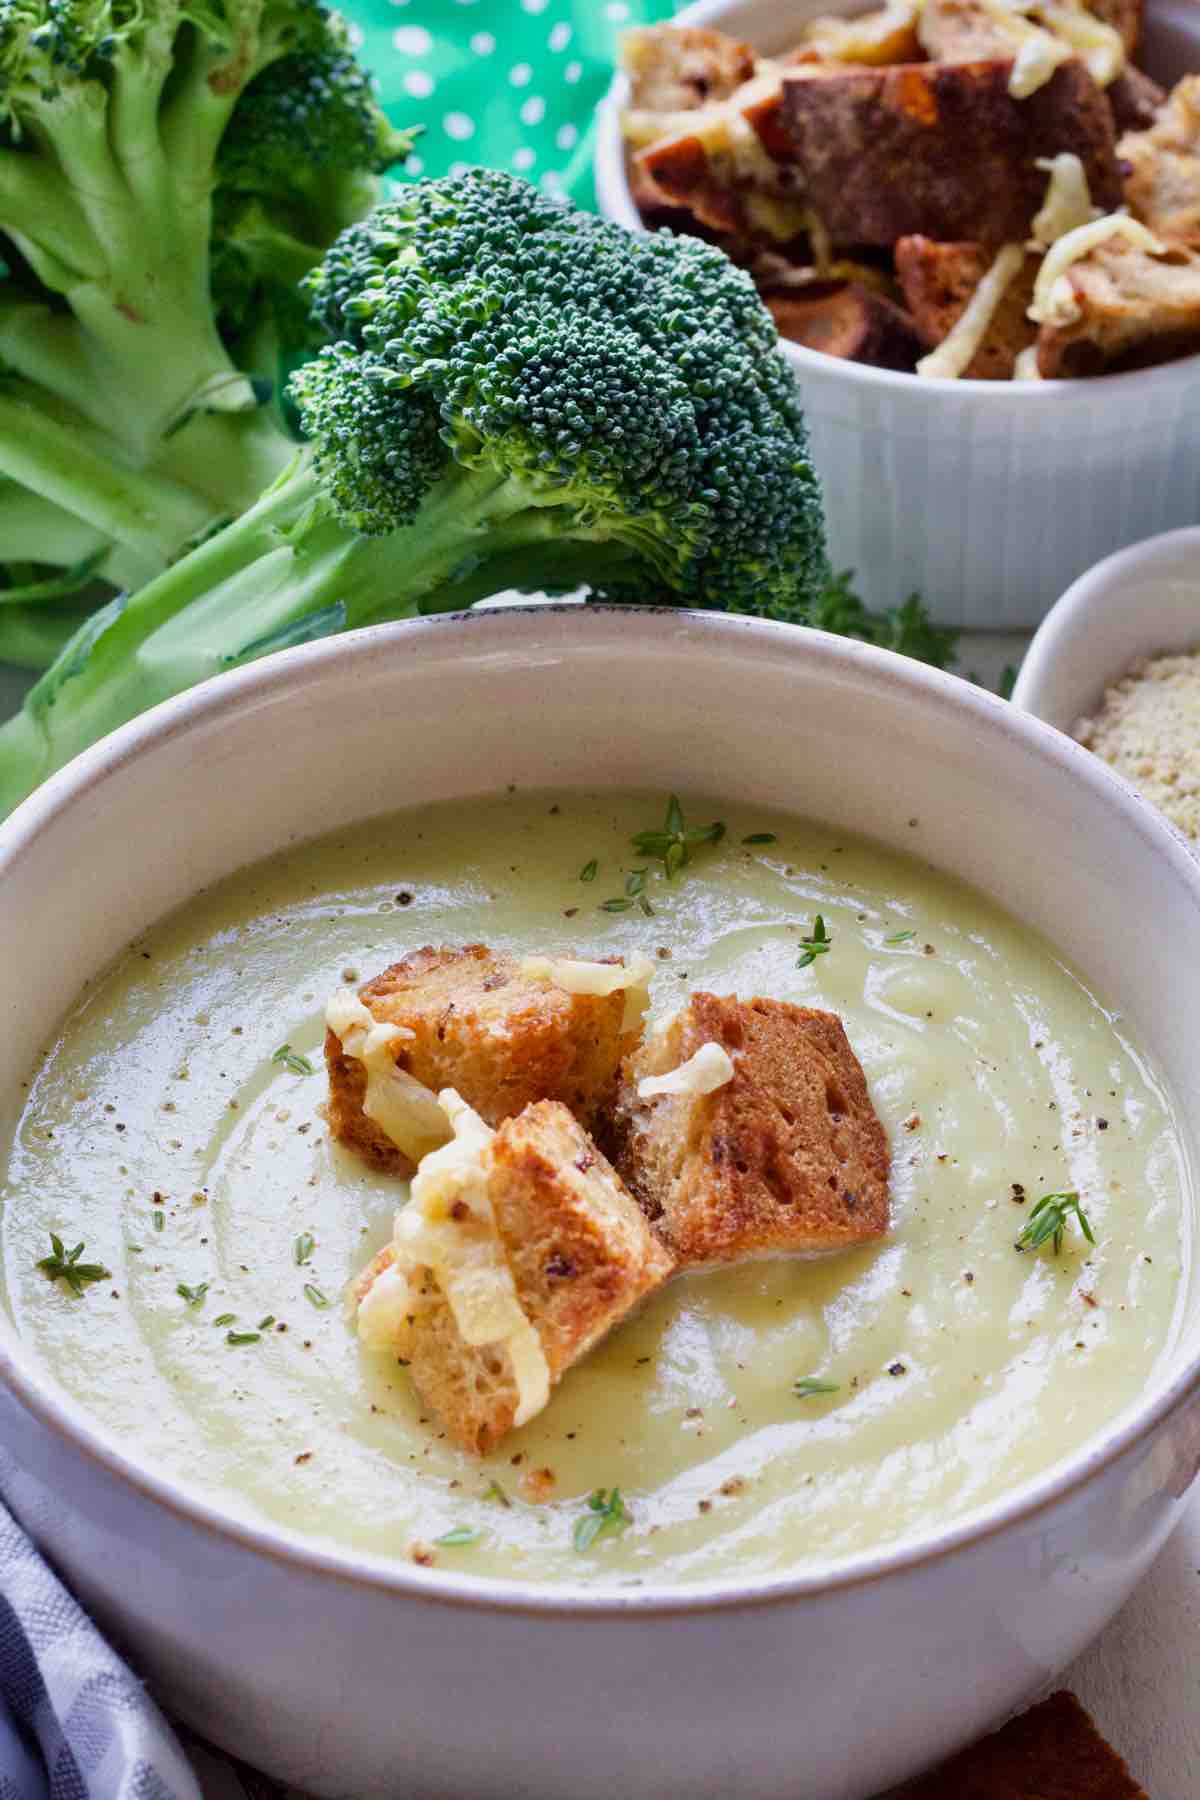 Broccoli soup in a bowl served with croutons.